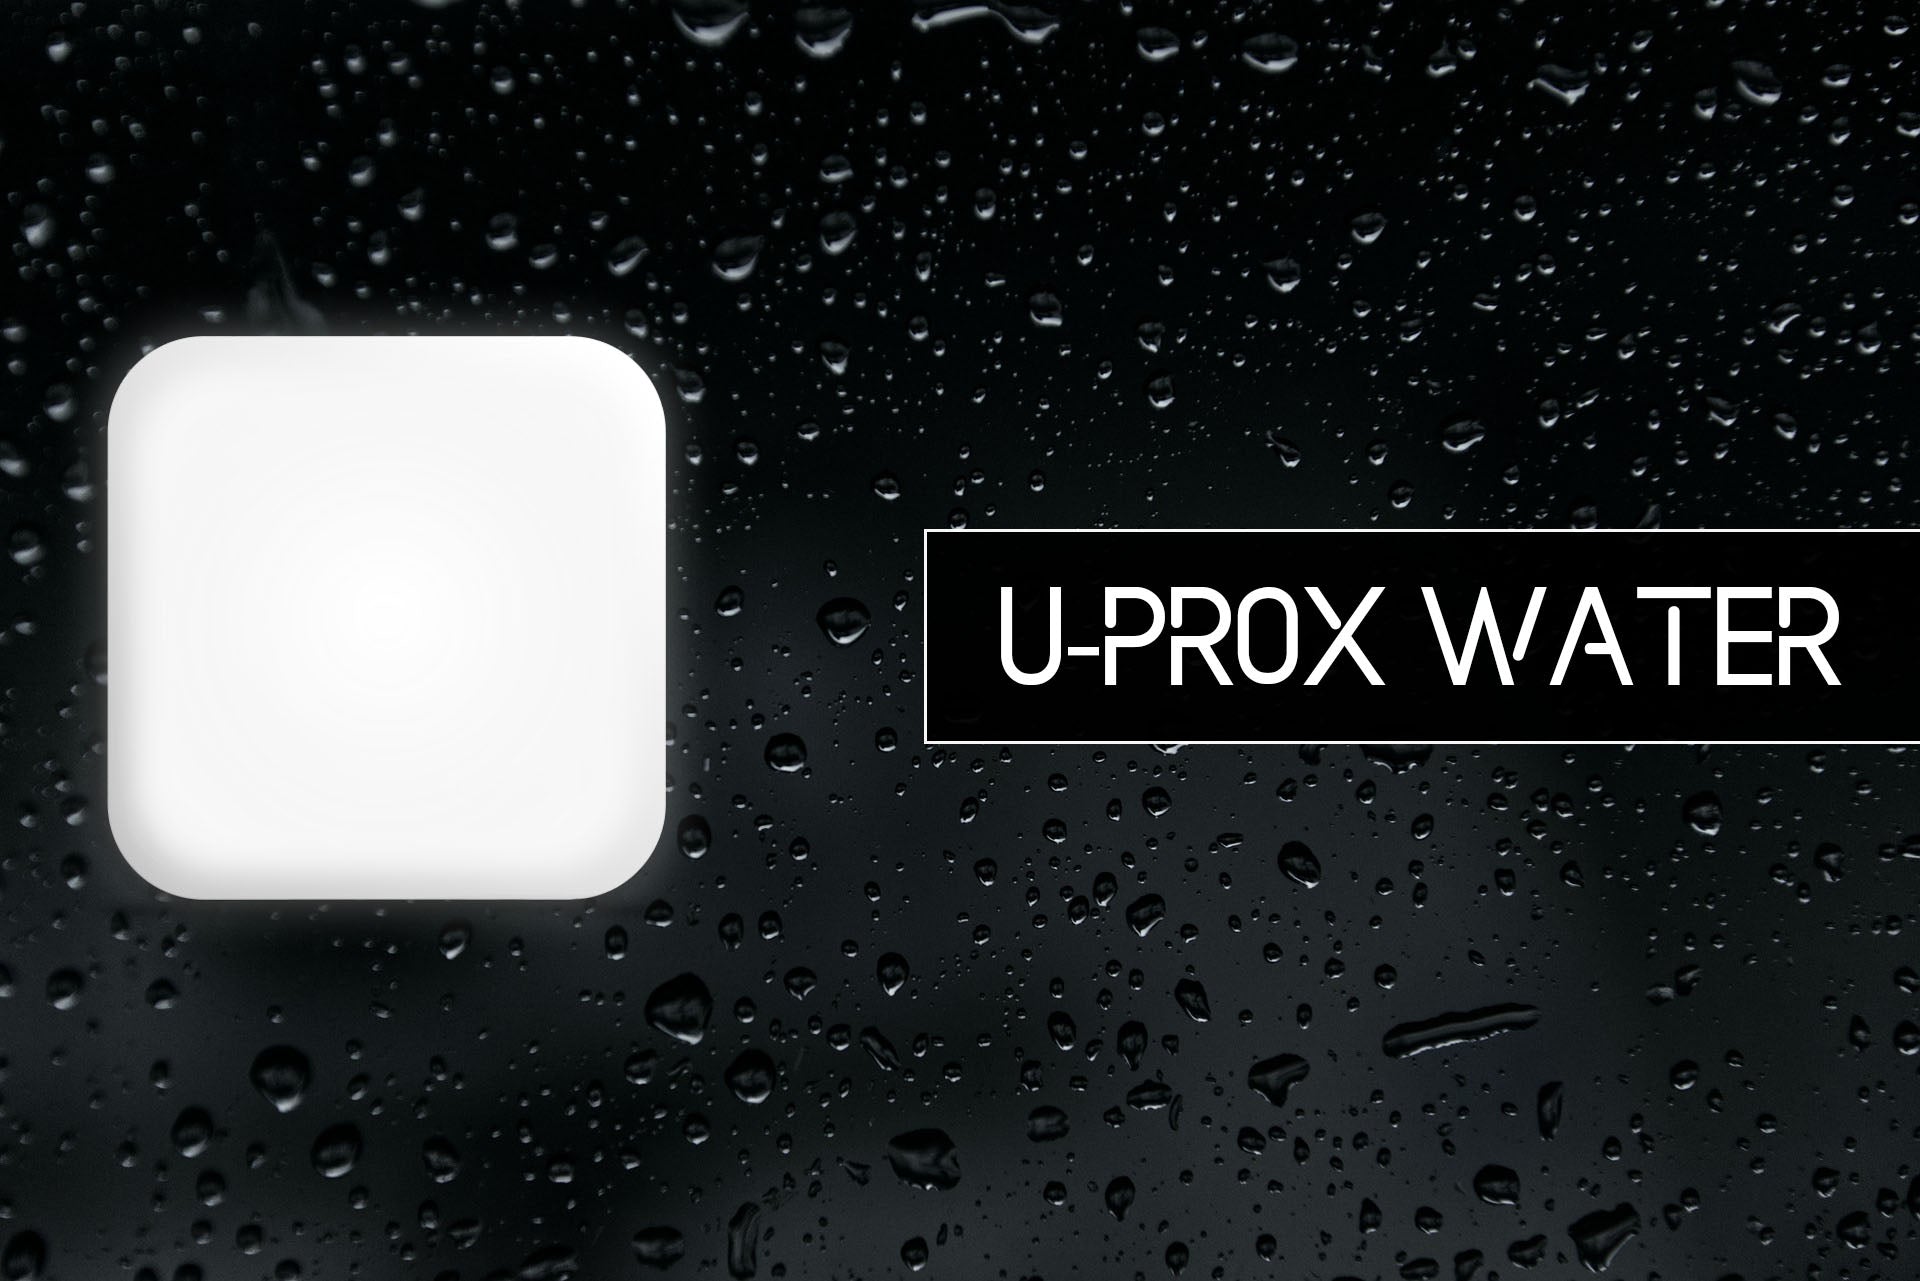 U-Prox Water - Wireless Water leak detector. It has four contacts for detecting leakage - 0